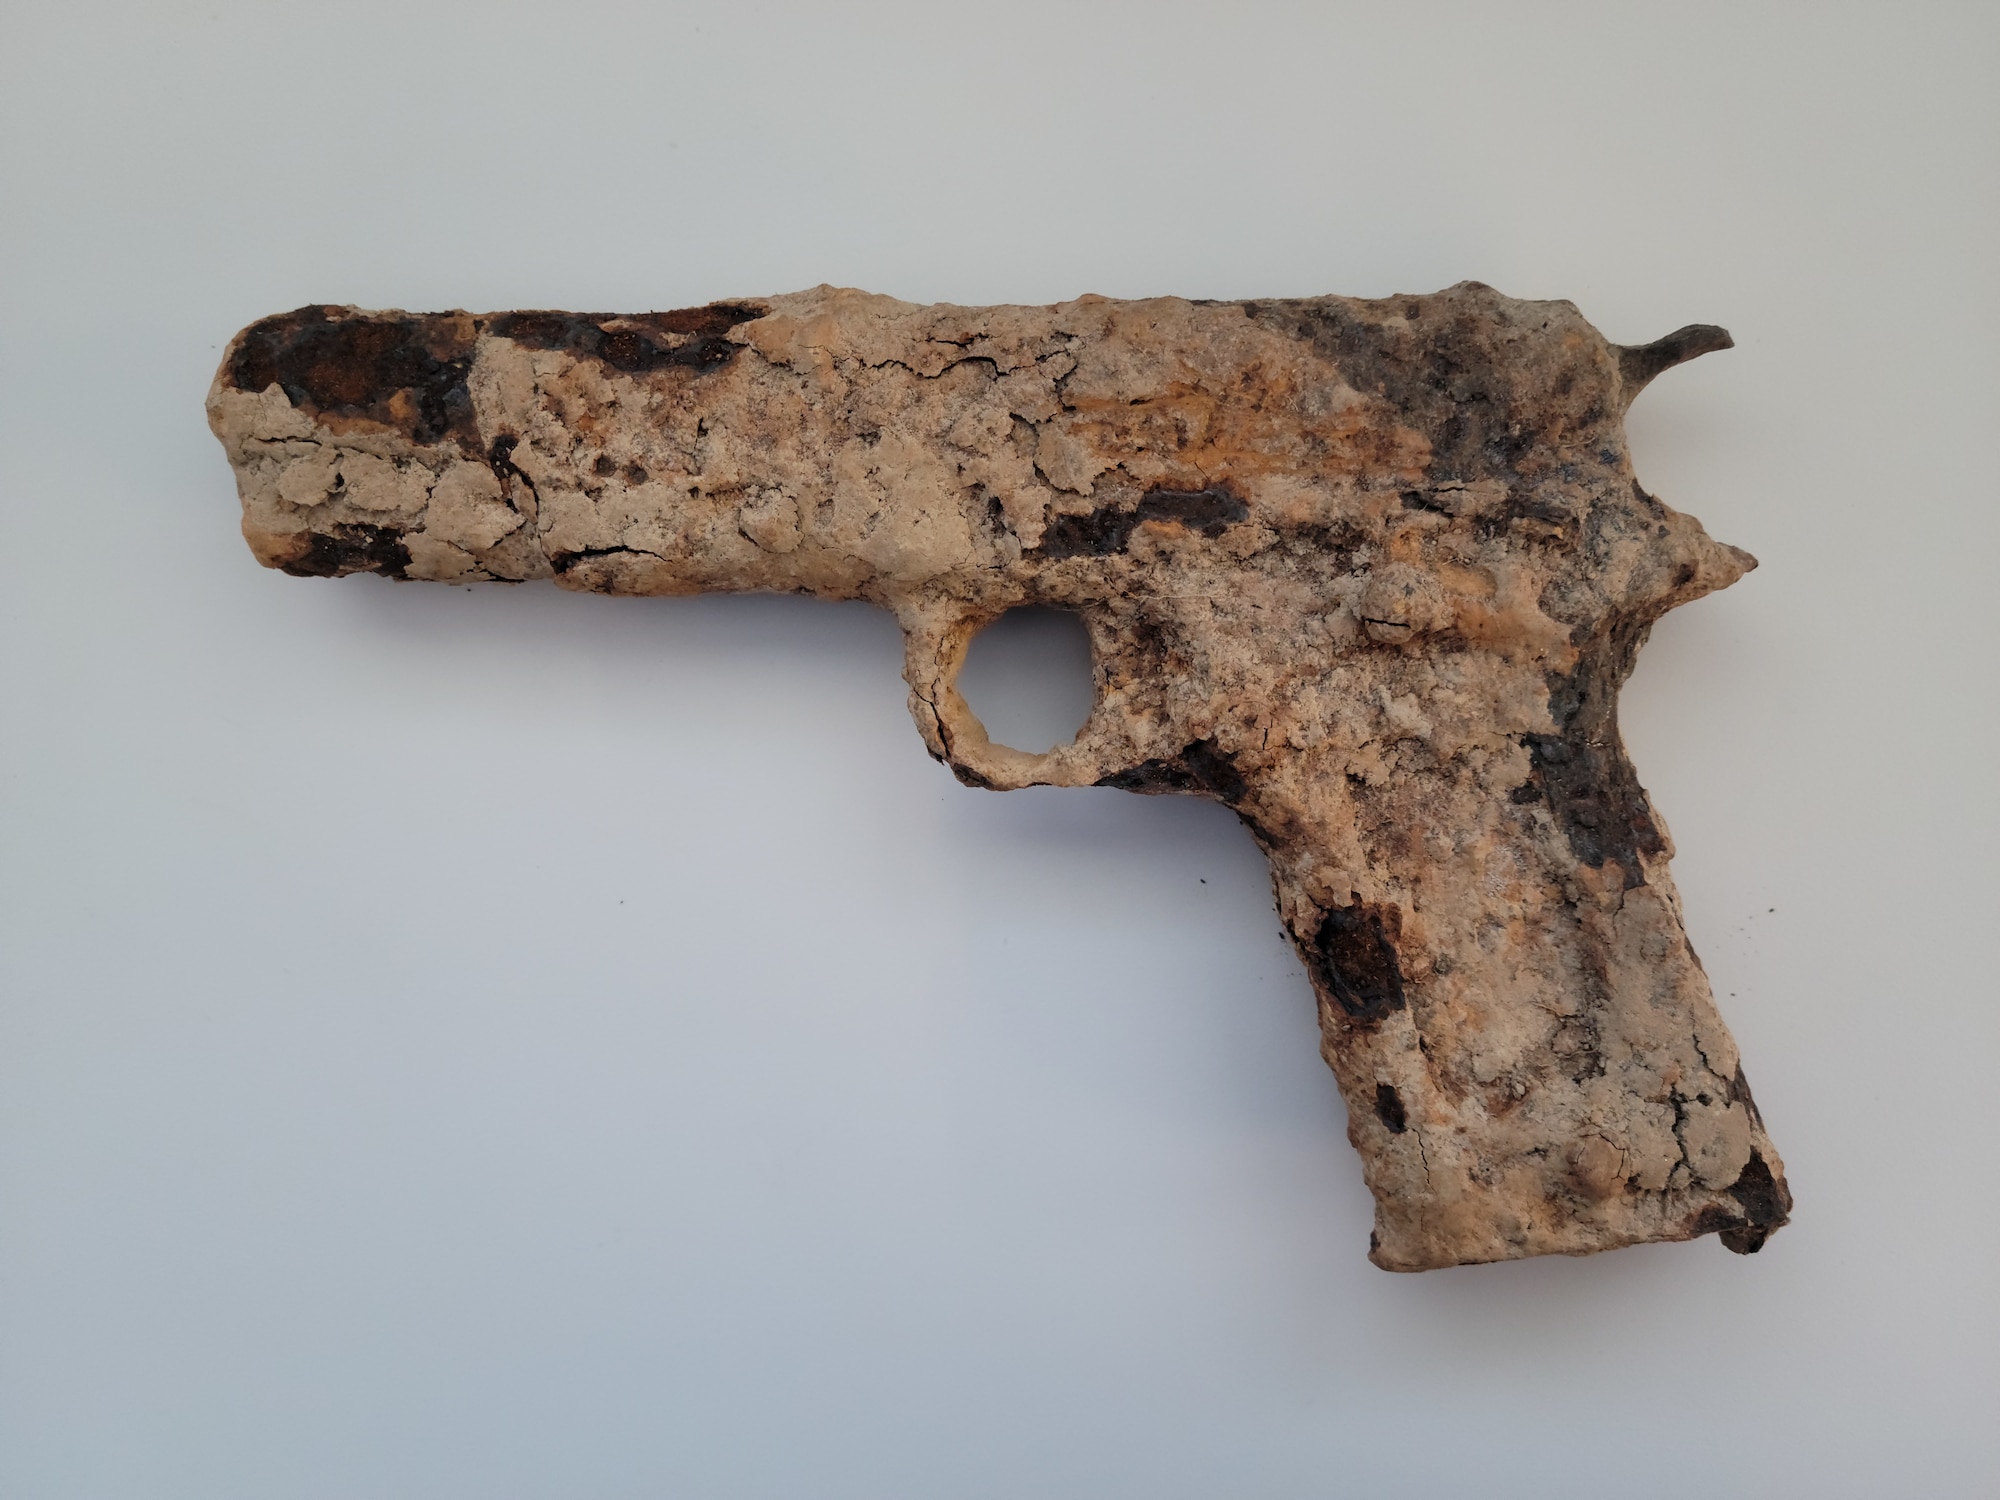 A 1911 pistol found at Arnold Air Force Base, Tenn., in 2019 is shown in this photo taken March 16, 2023. (U.S. Air Force photo by Shawn Chapman)